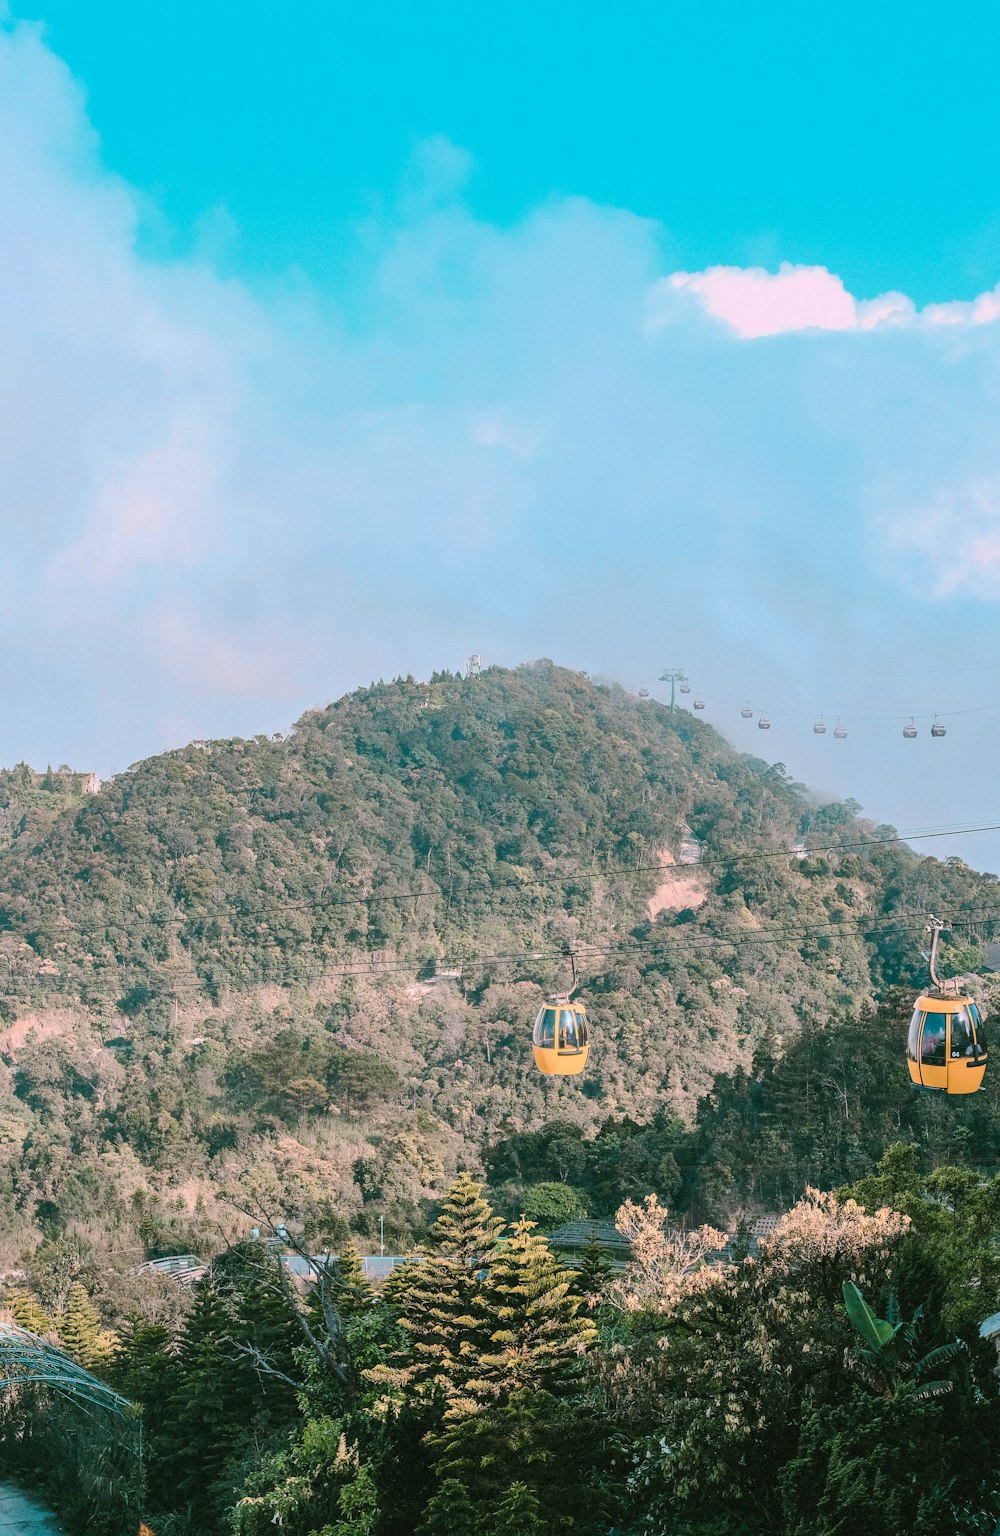 a couple of gondolas flying over a lush green hillside